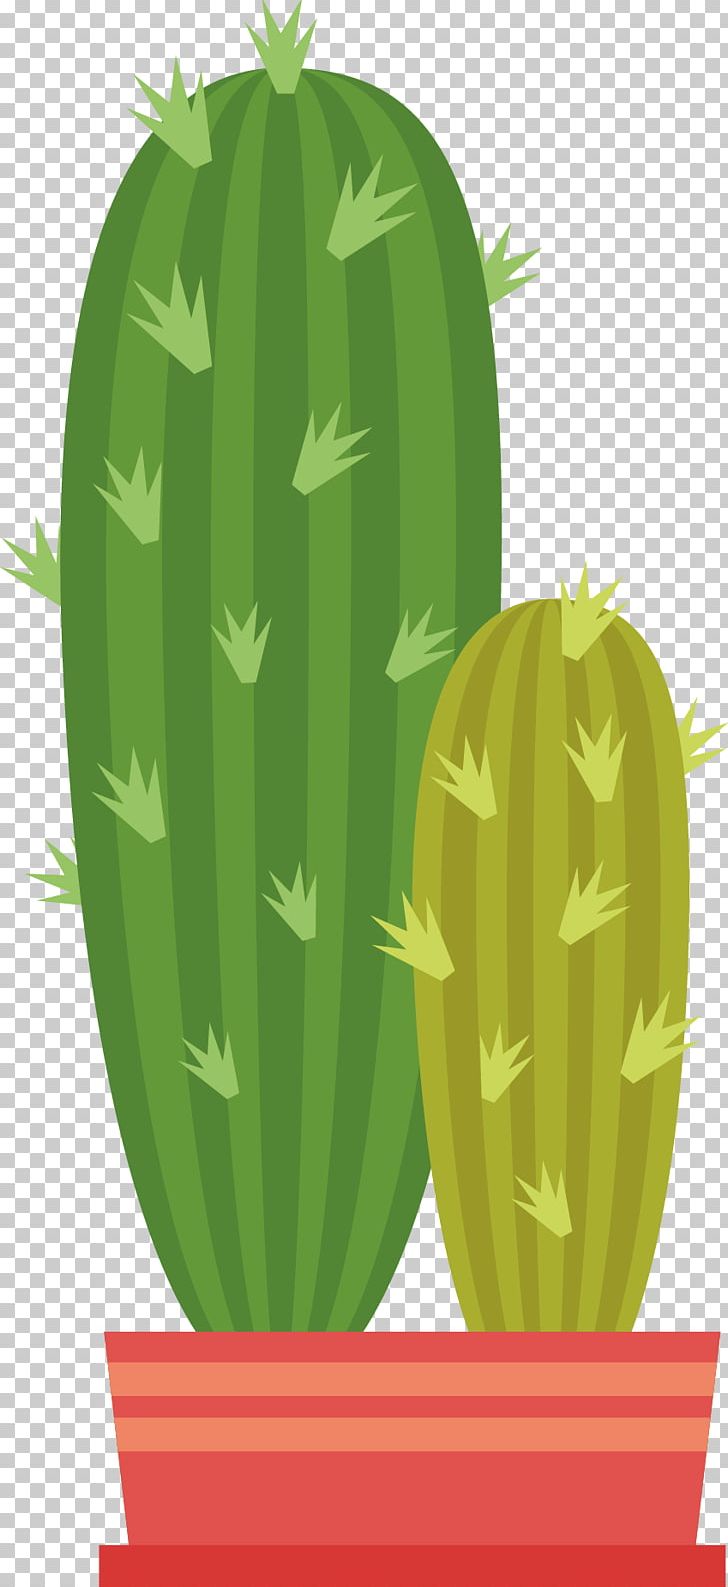 Cactaceae Euclidean Green PNG, Clipart, Barbed, Botany, Cactus Cartoon, Cactus Flower, Cactus Vector Free PNG Download